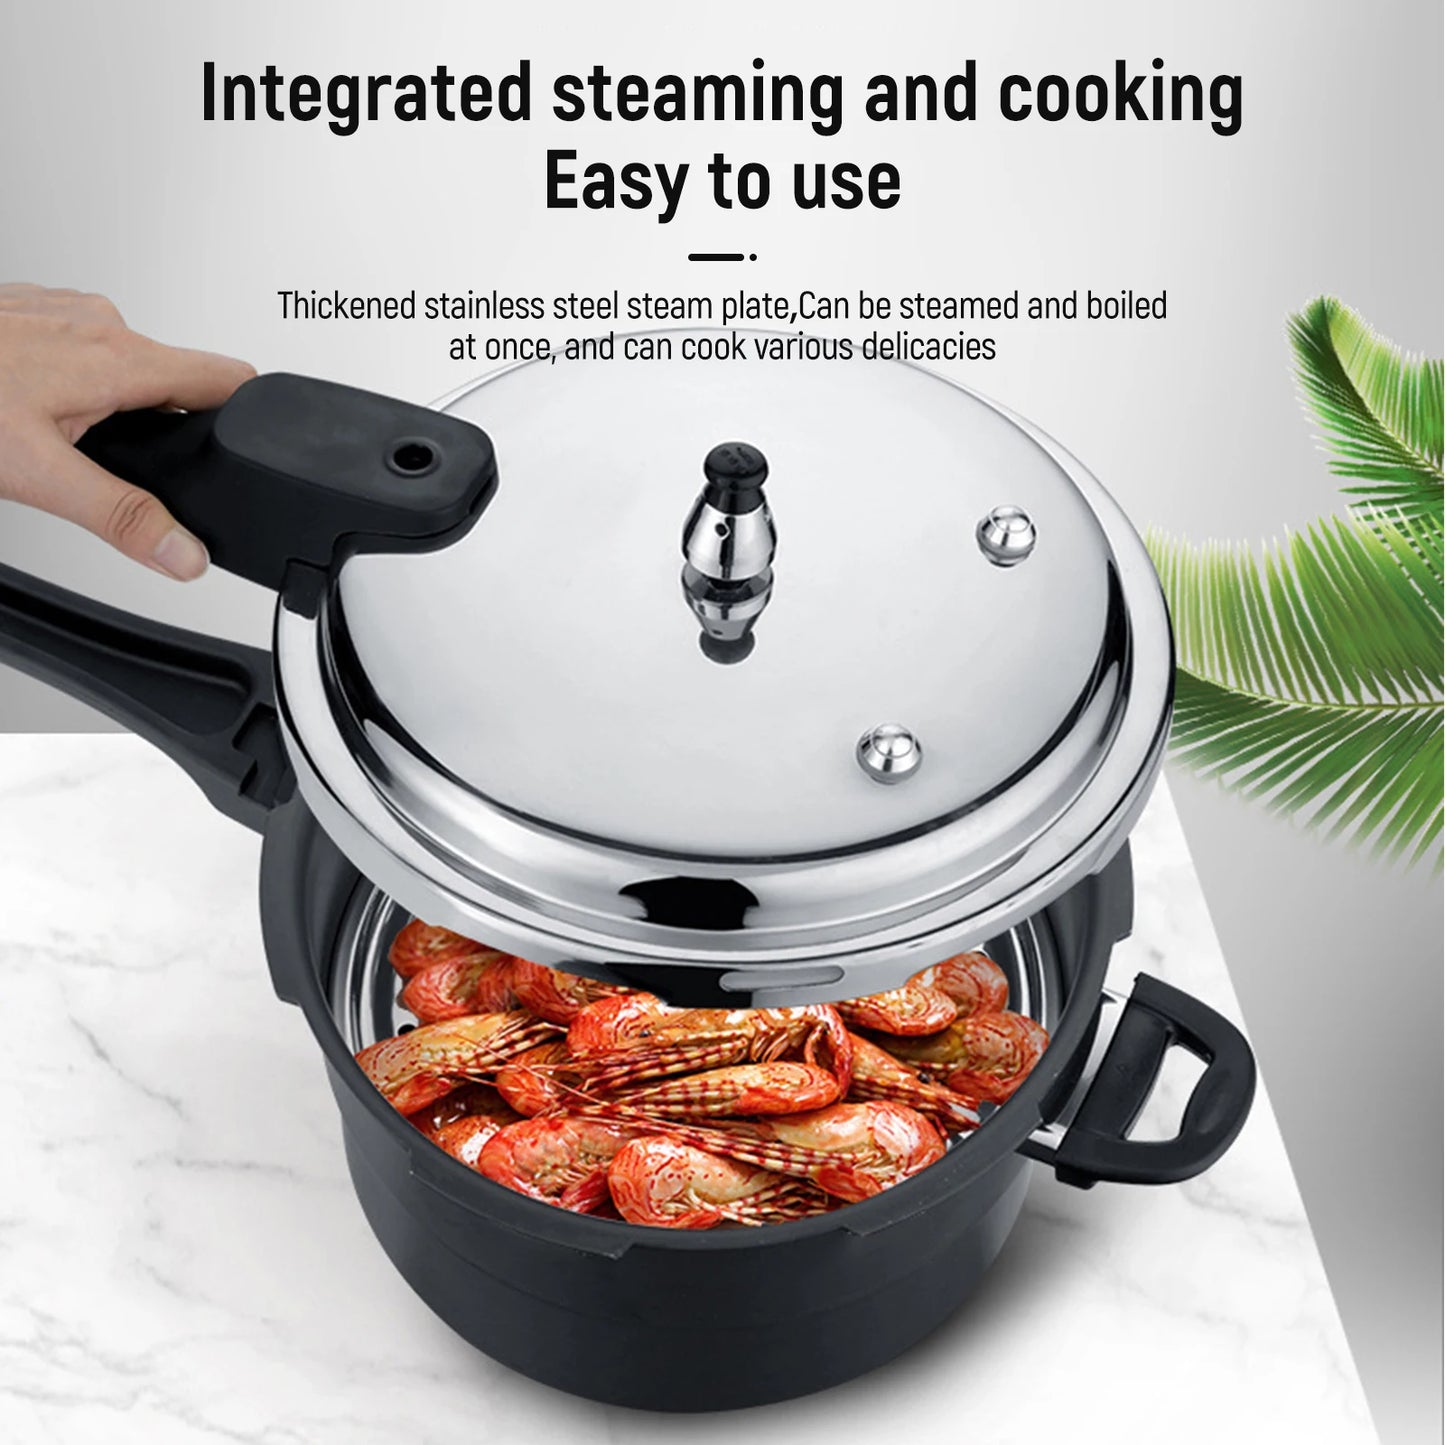 4L-10L Ultra-Durable Stainless Steel Pressure Cooker
Pressure Cooker for Gas and Induction Stoves
Non-Stick Coating Pressure Cooker
Safety Features Pressure Cooker